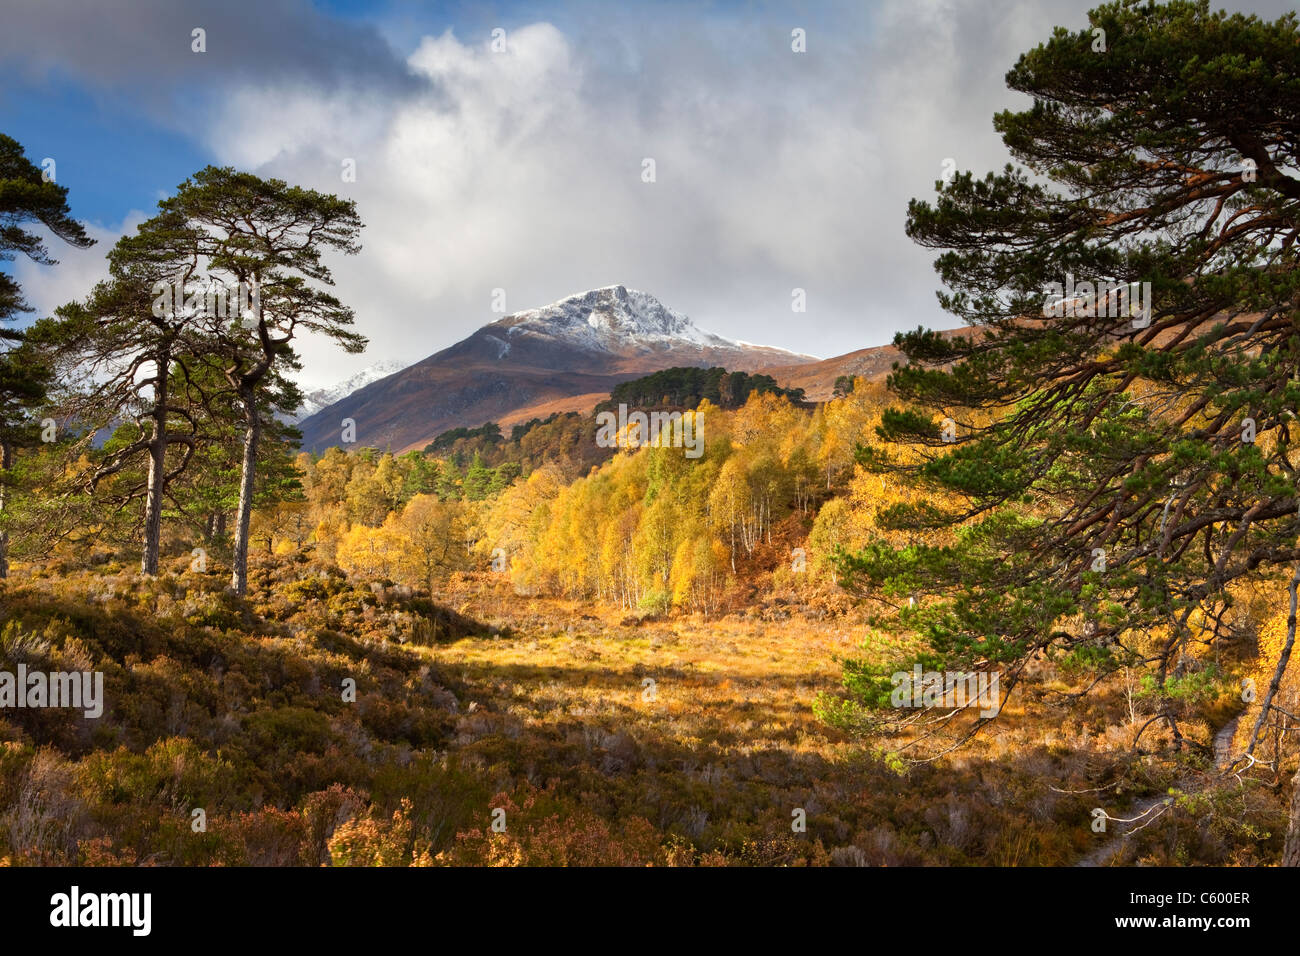 Sgurr na Lapaich and Autumn colours in Glen Affric, Scotland, UK. Seen from the River Affric Trail maintained by Forestry Commission Scotland Stock Photo